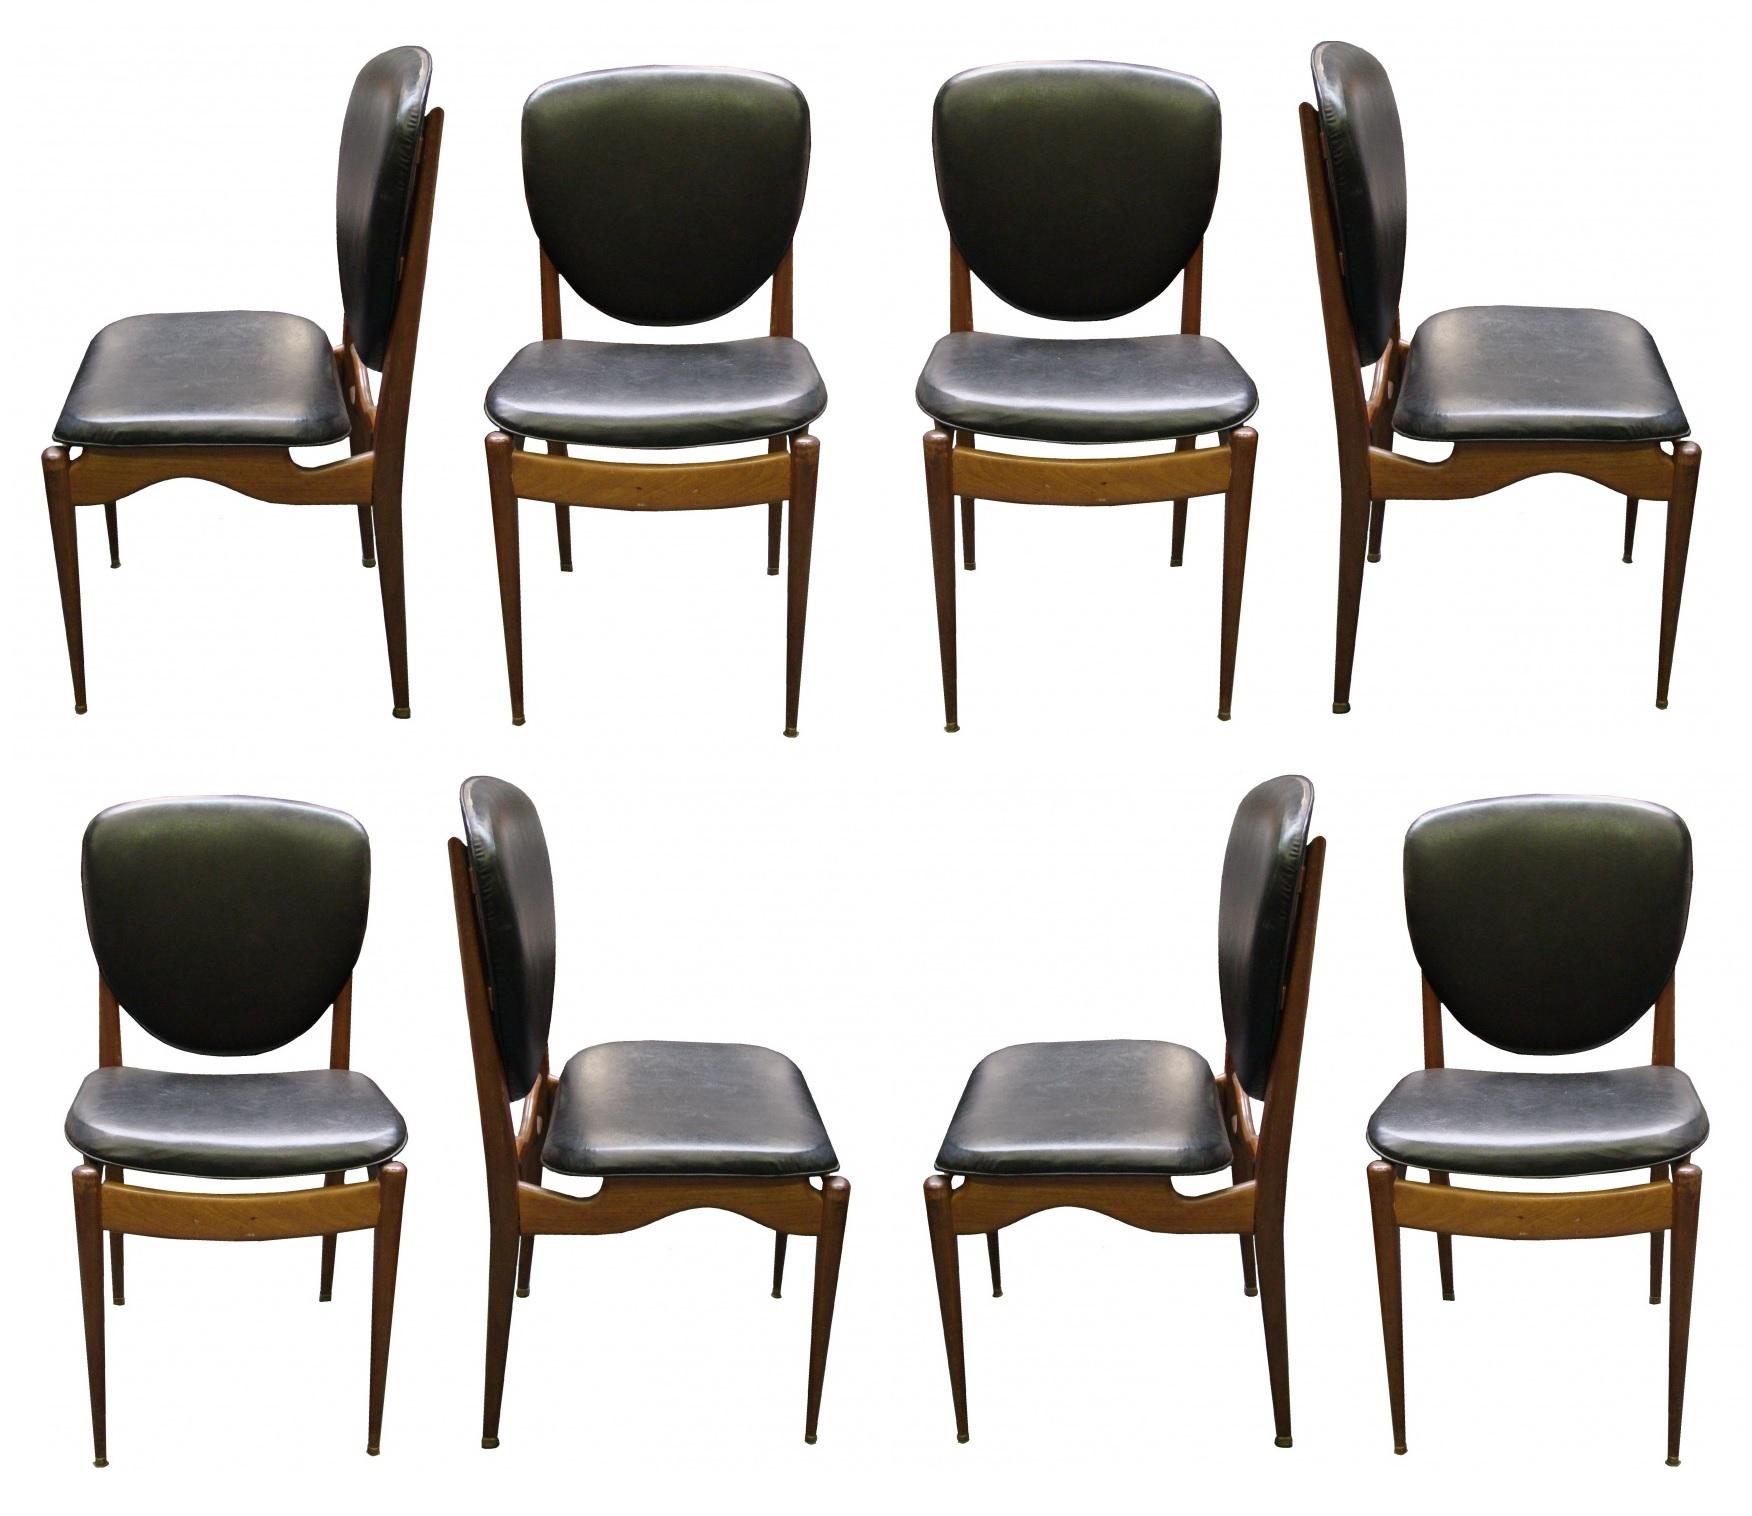 Set of 8 Chairs 50° in Leather and Wood, Danish